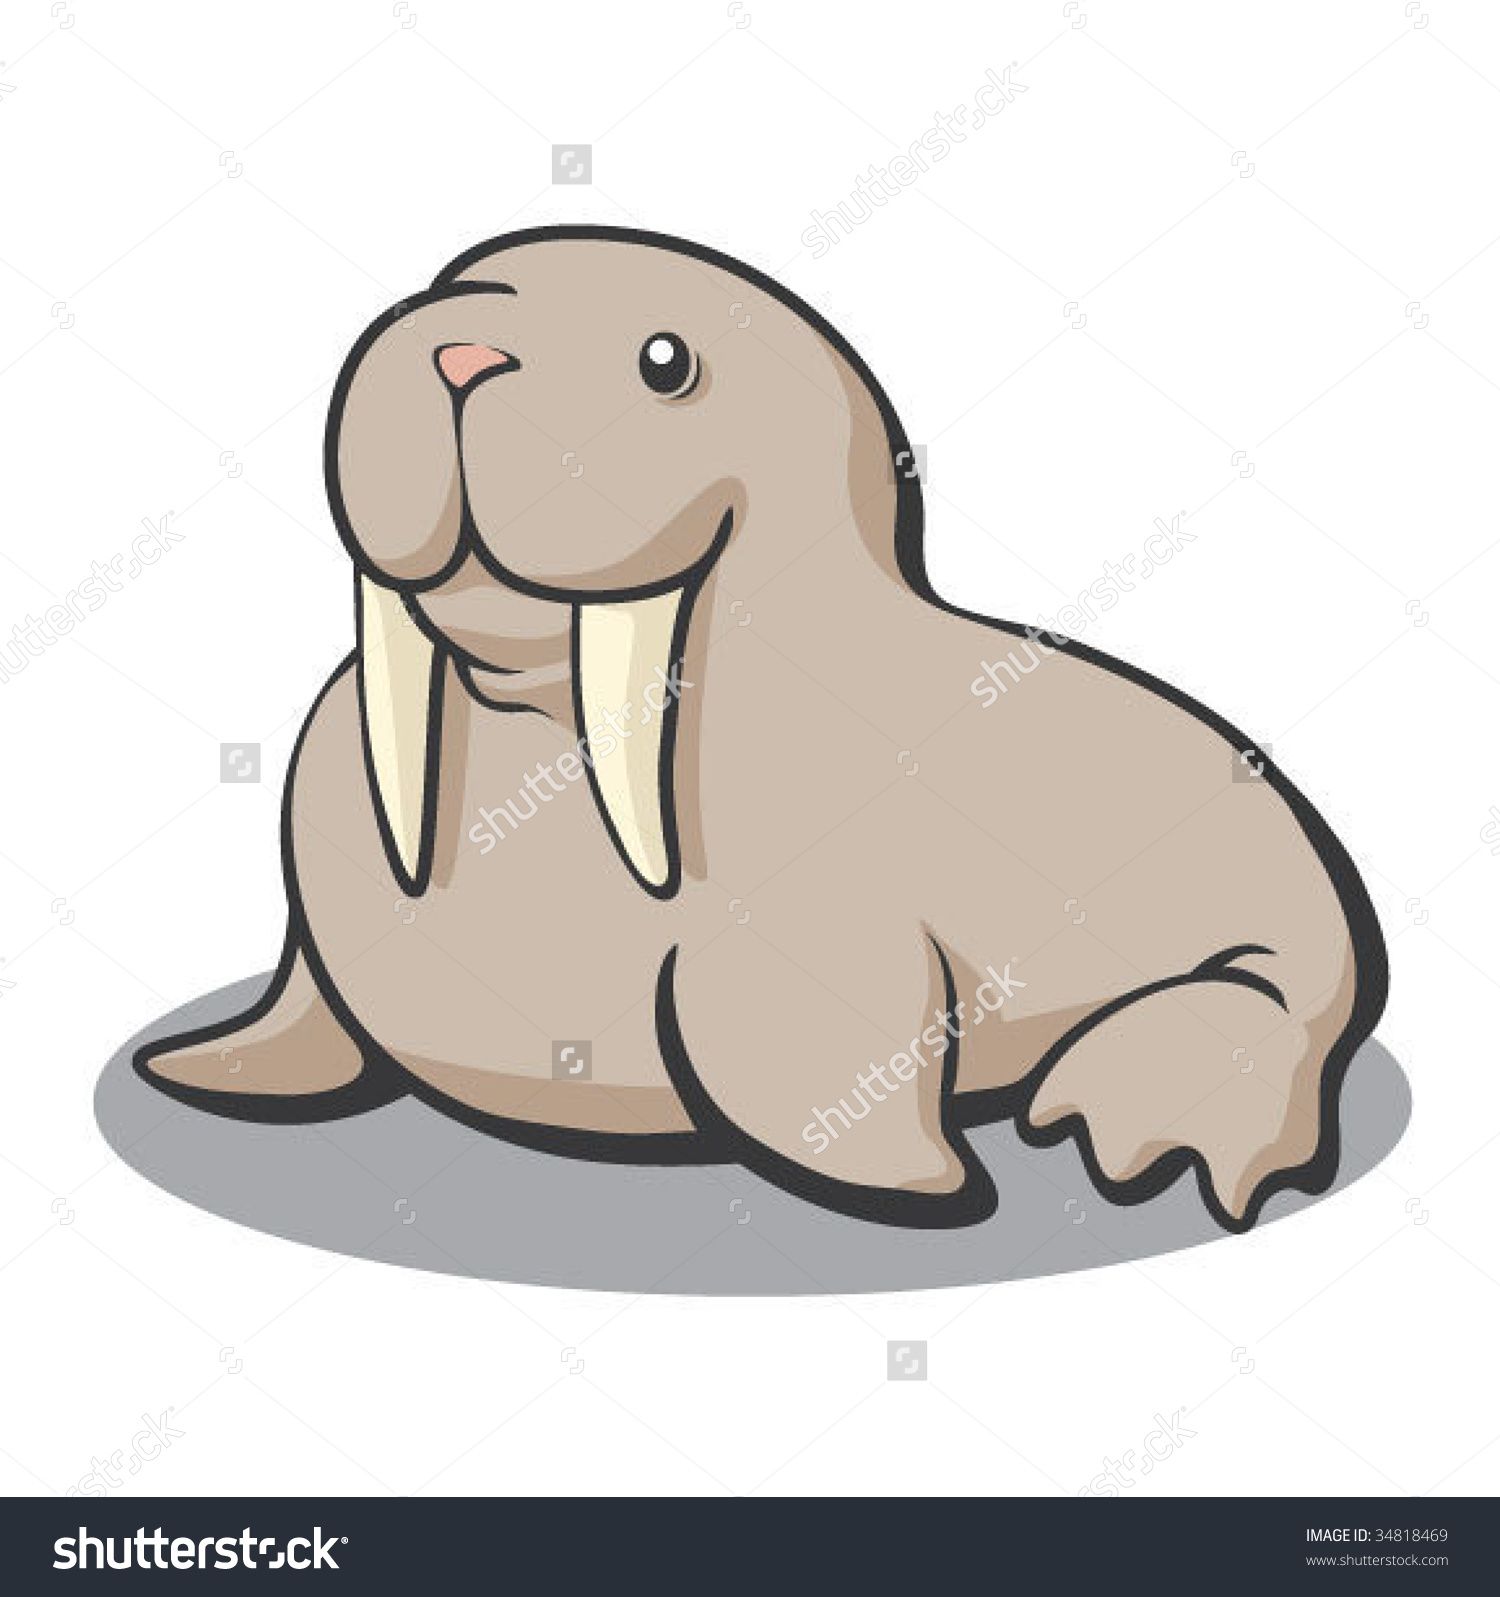 Image result for cute. Walrus clipart baby